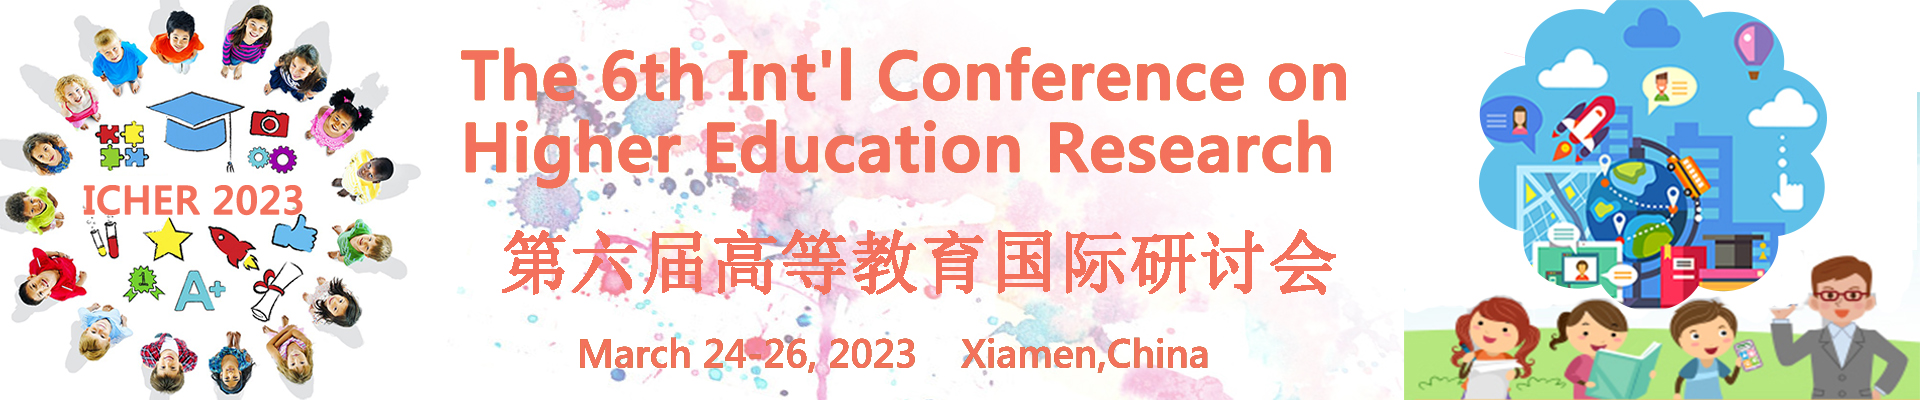 The 6th Int'l Conference on Higher Education Research (ICHER 2023), Xiamen, Fujian, China